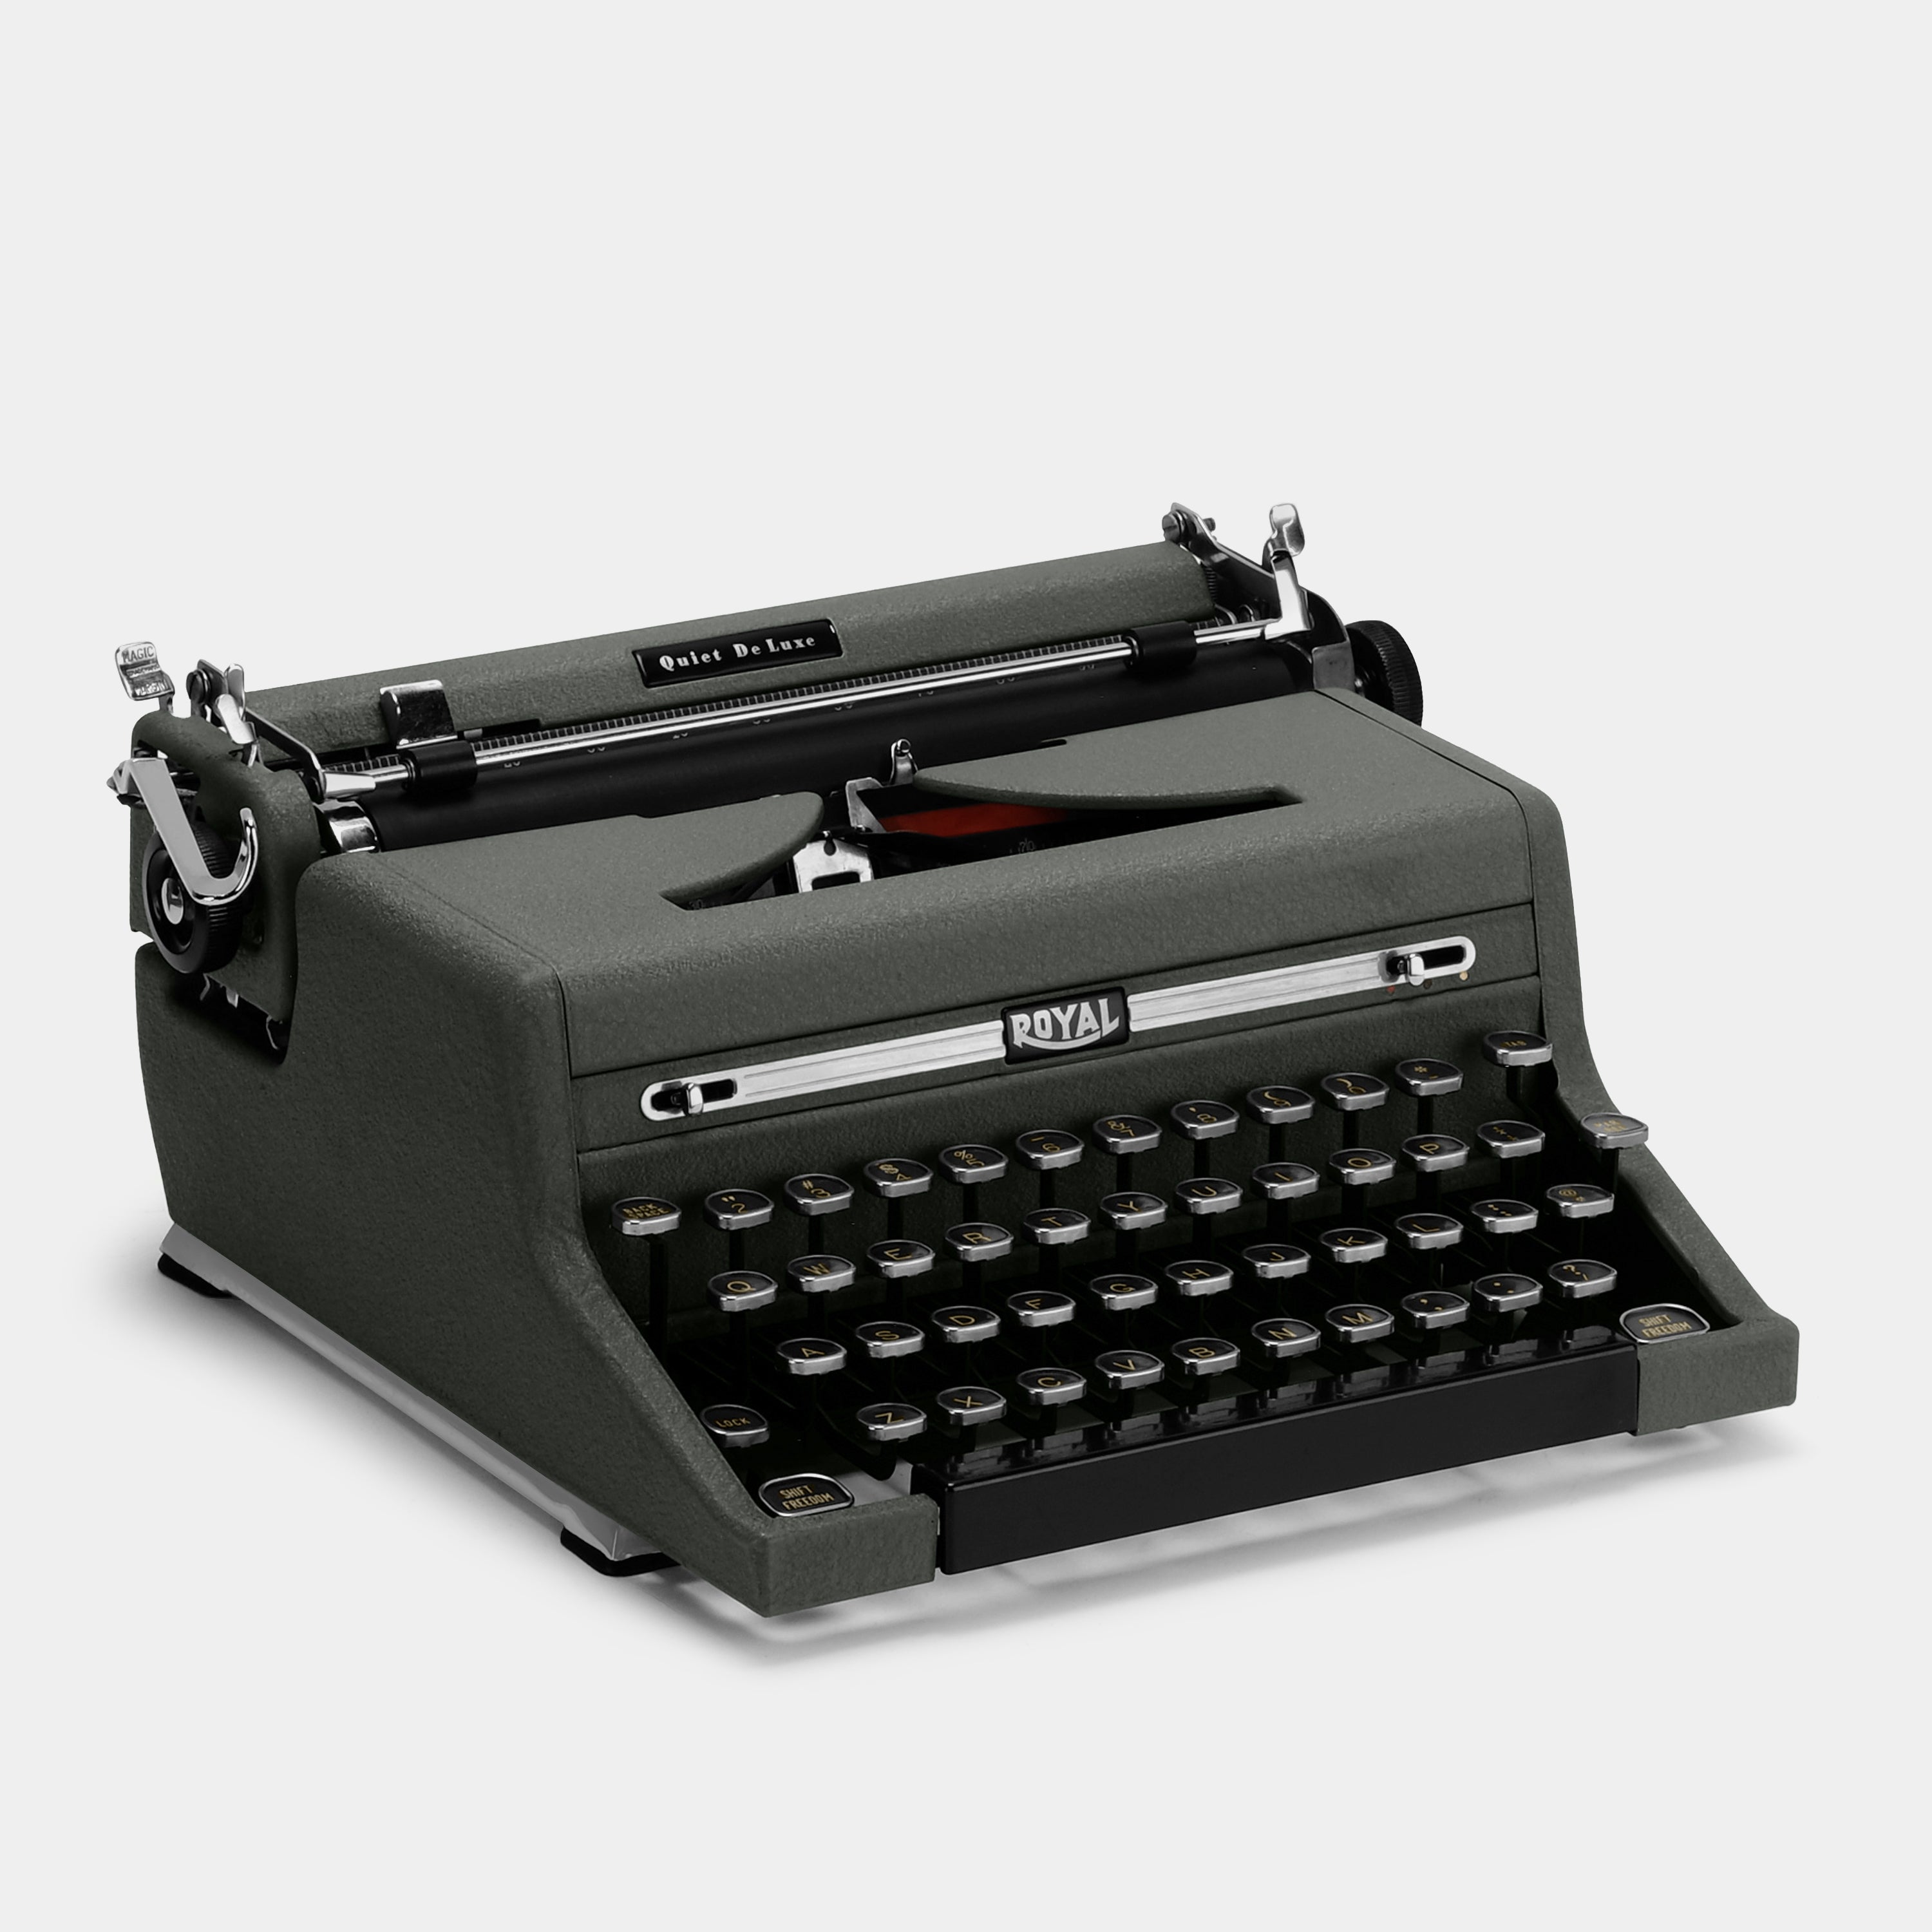 Royal Quiet De Luxe Grey Manual Typewriter and Case